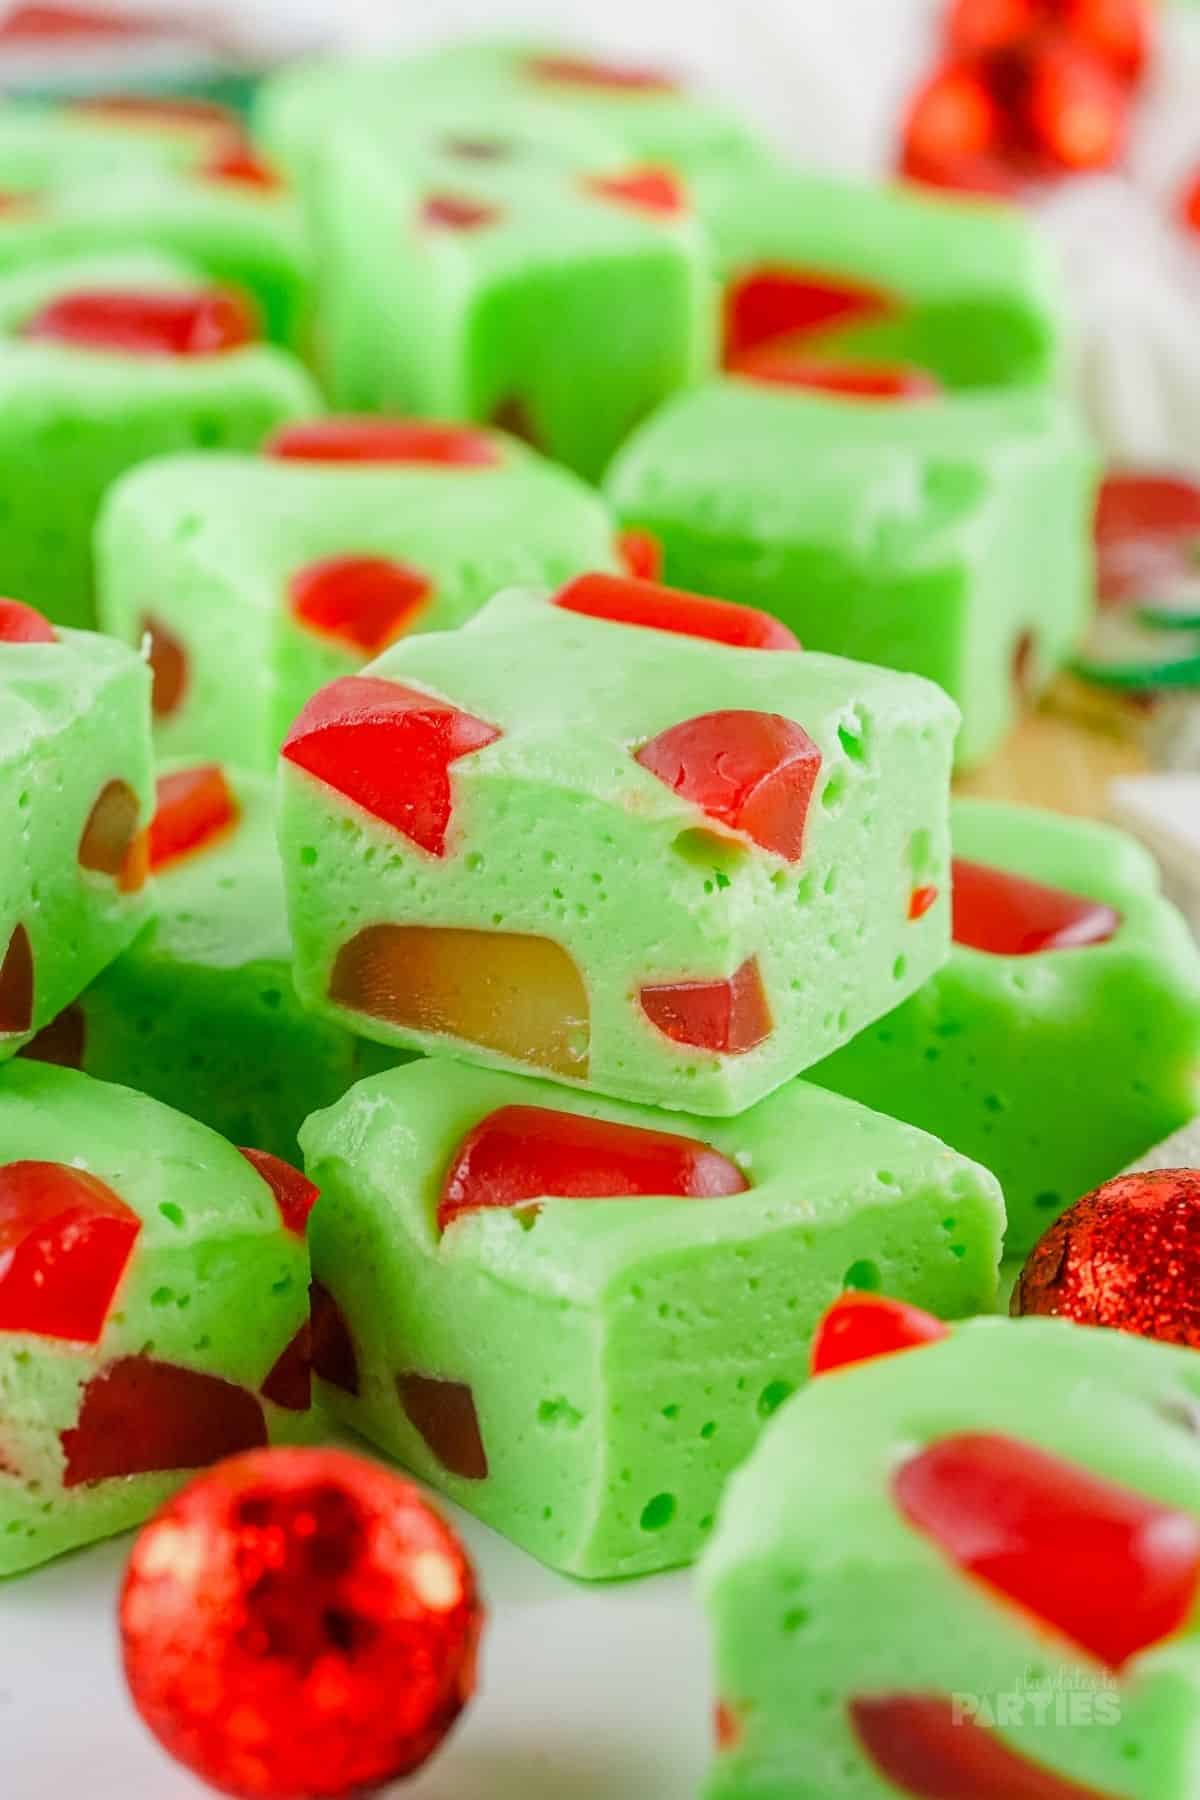 Red and green Christmas nougat scattered on a white surface.